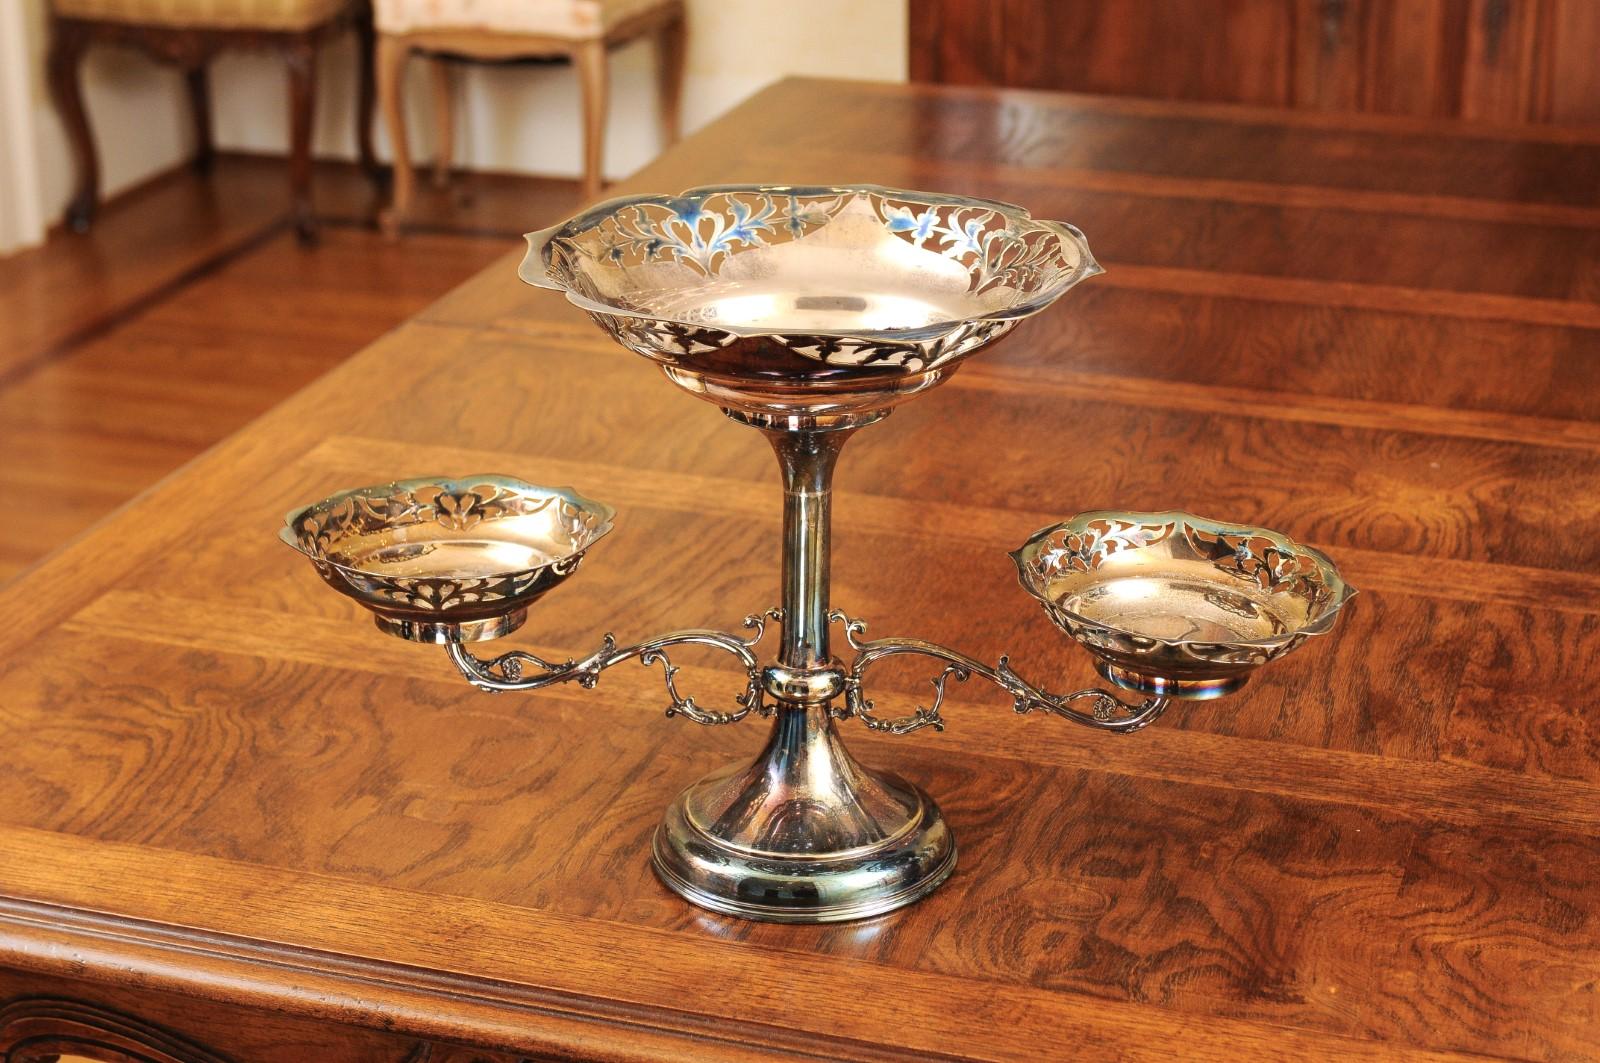 French 19th Century Silver Epergne with Pierced Foliage and Scrolling Motifs For Sale 8